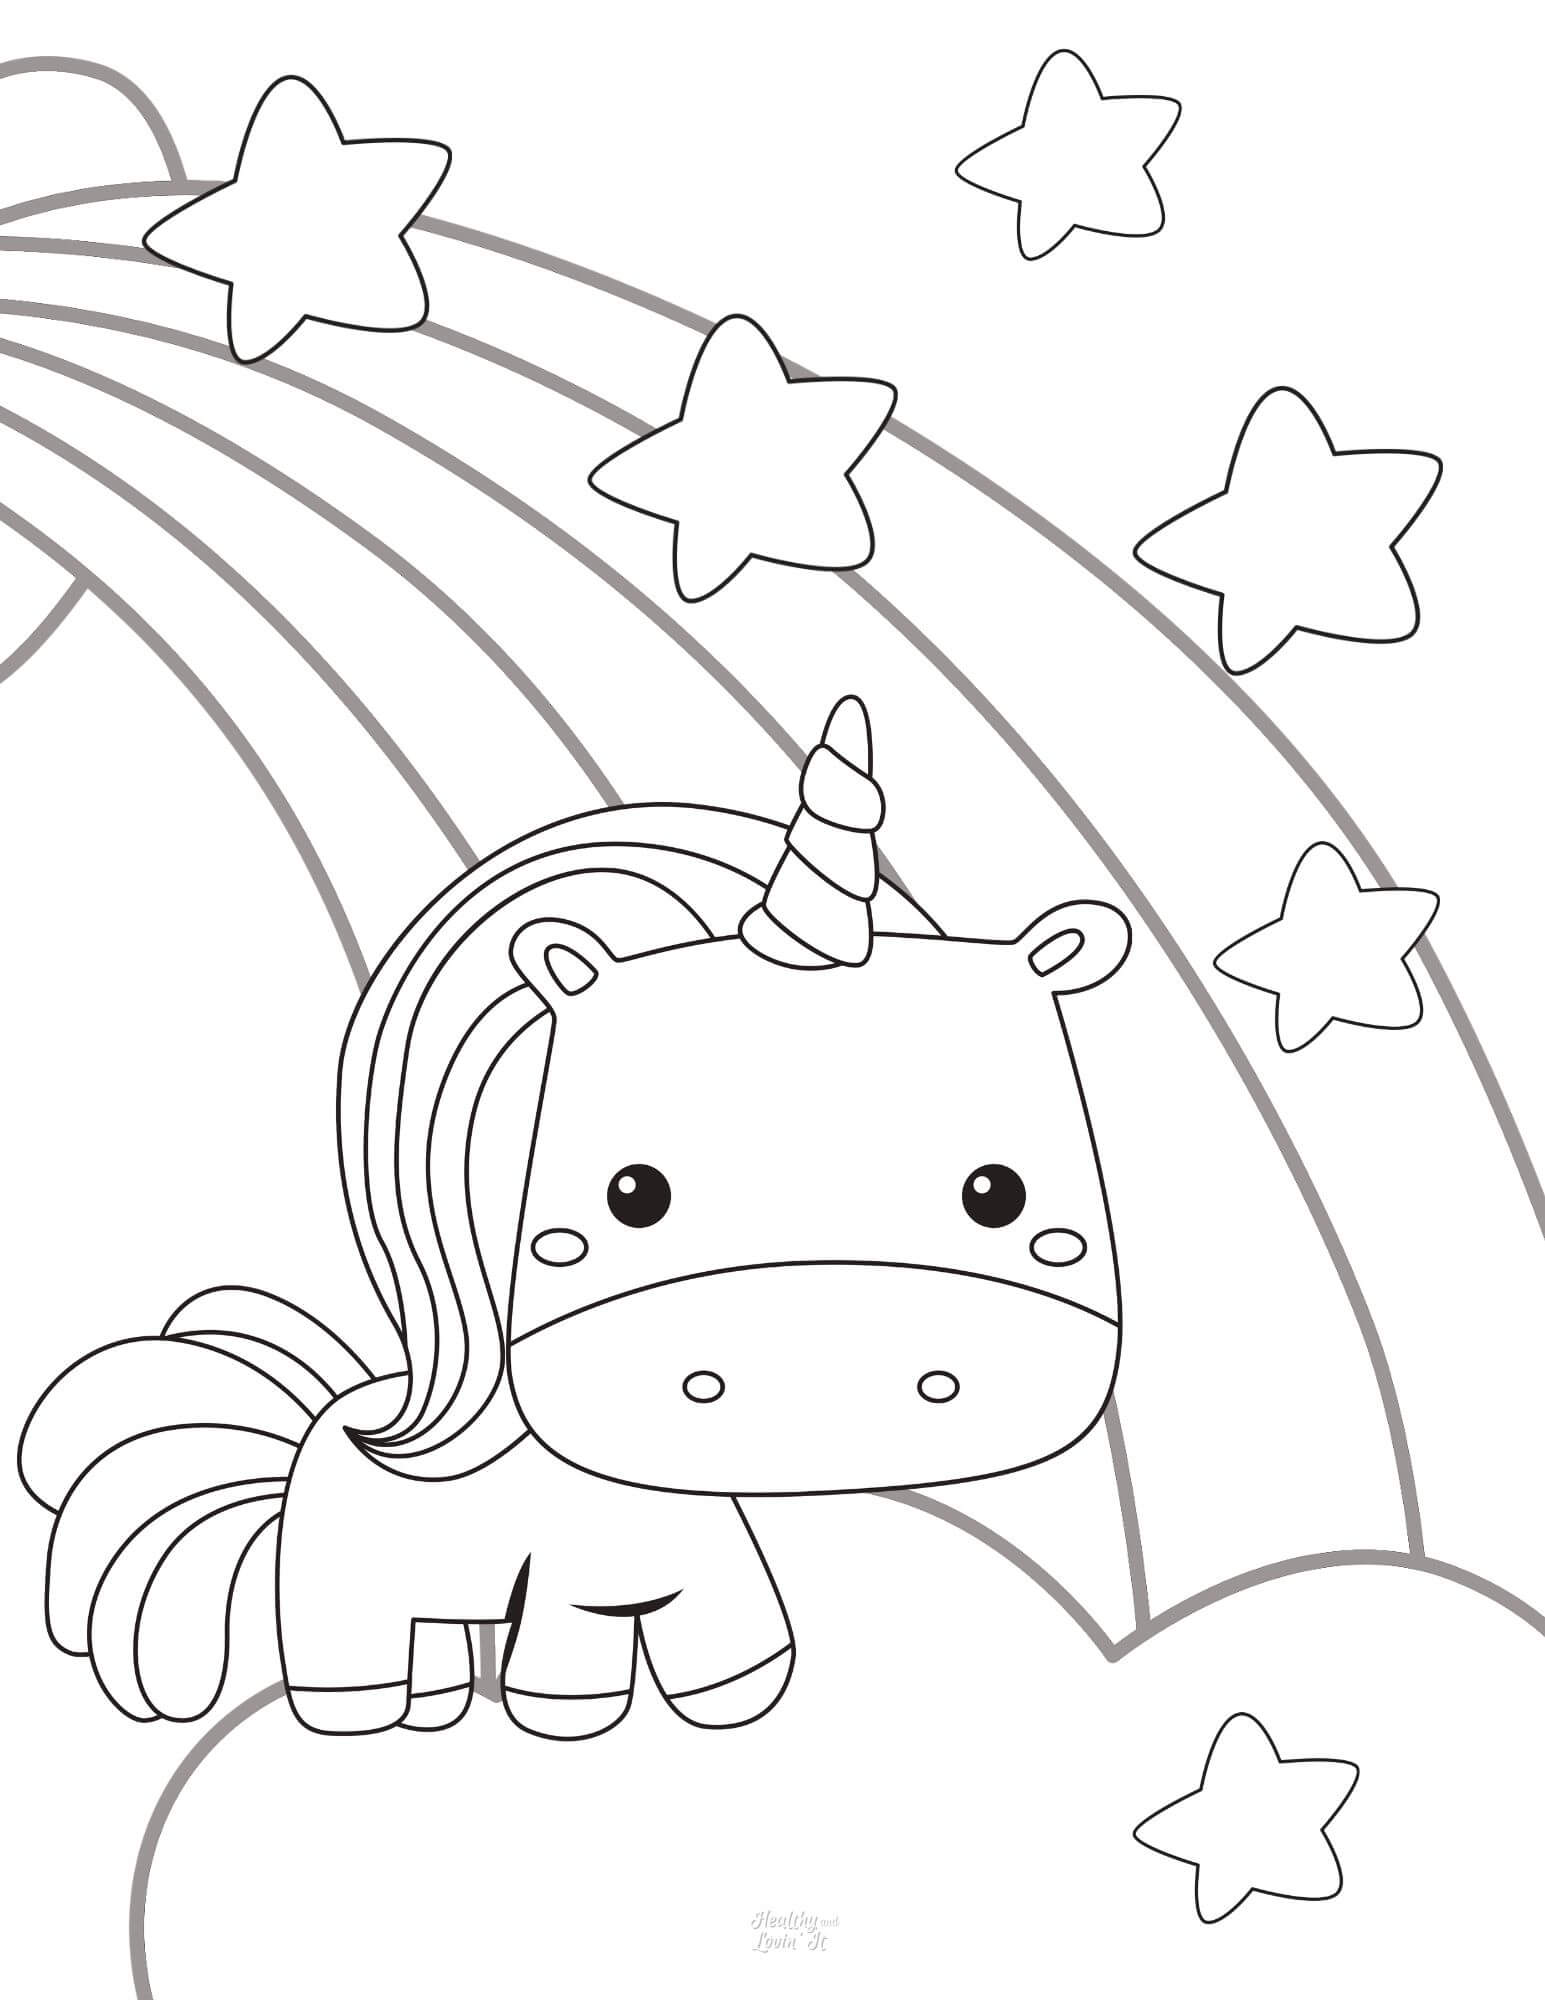 Free Unicorn Coloring Pages - 3 Super Cute Designs